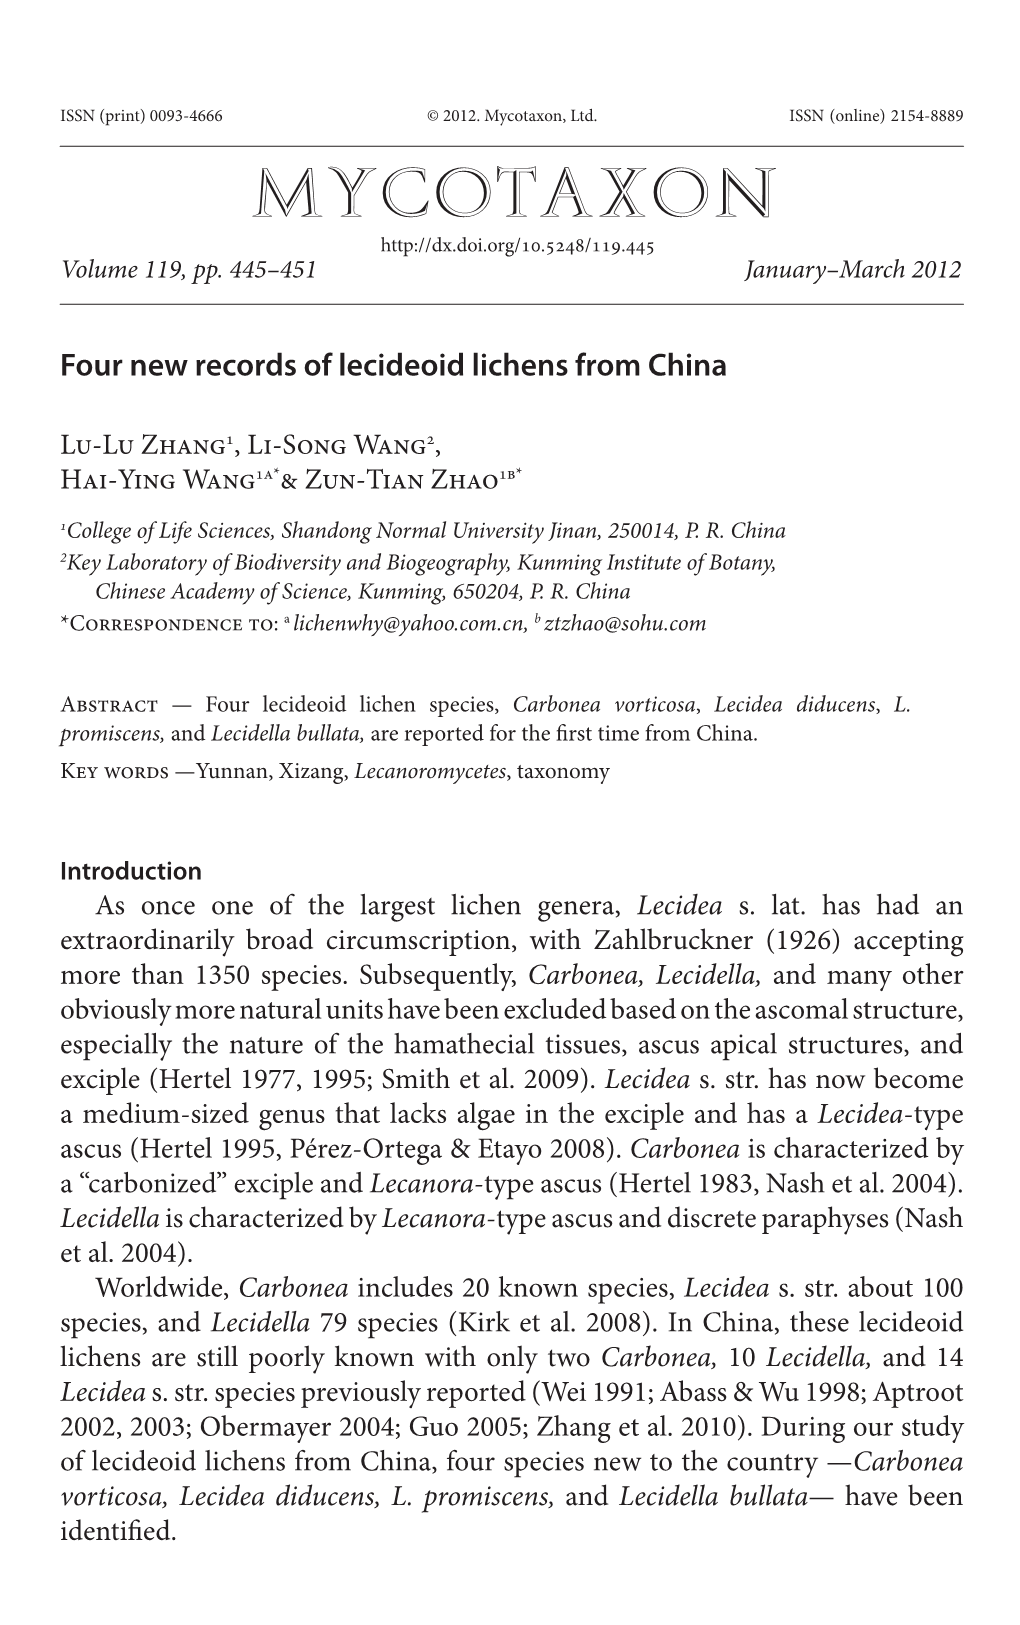 Four New Records of Lecideoid Lichens from China